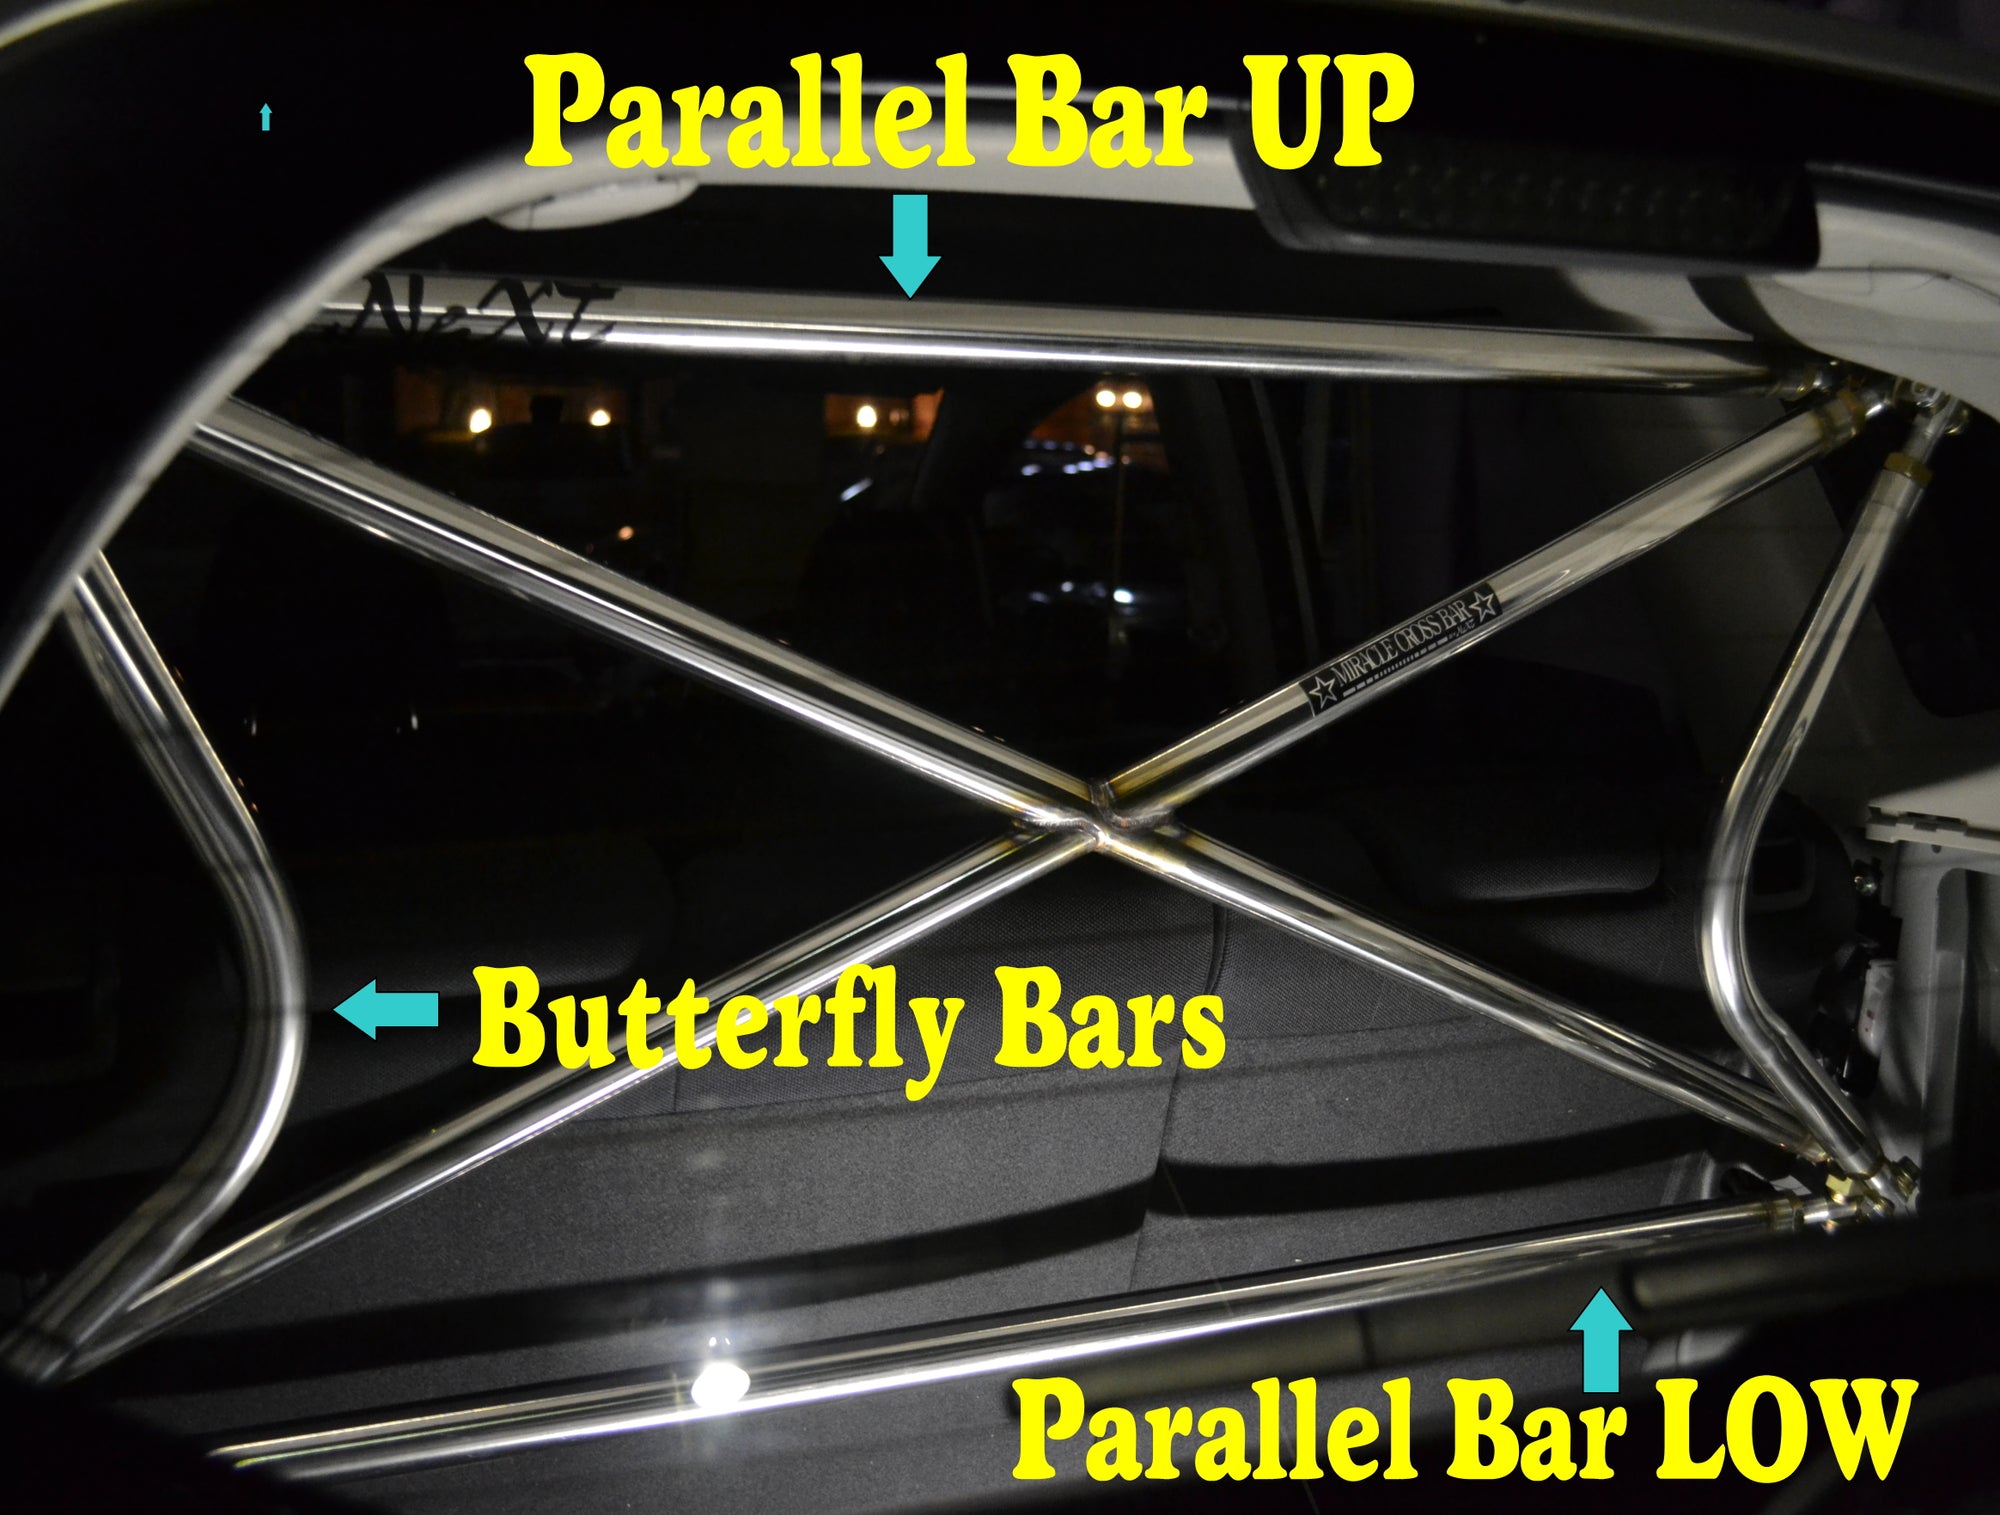 NEXT MIRACLE CROSS BAR BUTTERFLY BAR RIGHT & LEFT STAINLESS 32 FOR DAIHATSU ESSE 3DR 5DR NEXT-01367